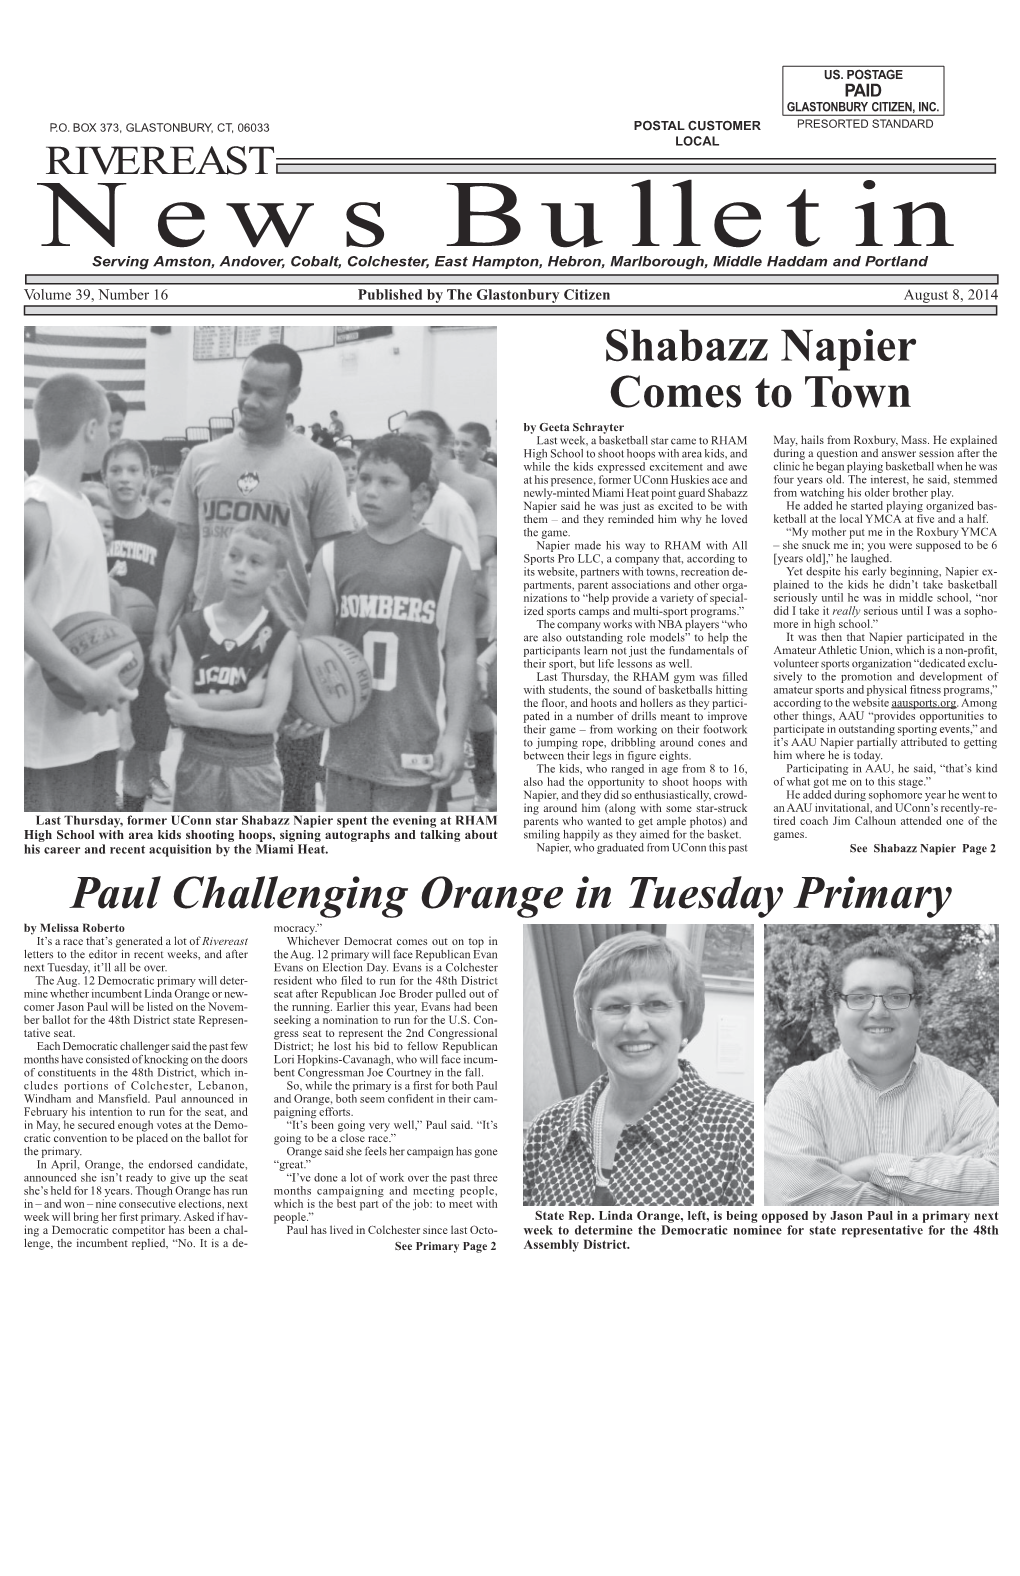 August 8, 2014 Shabazz Napier Comes to Town by Geeta Schrayter Last Week, a Basketball Star Came to RHAM May, Hails from Roxbury, Mass